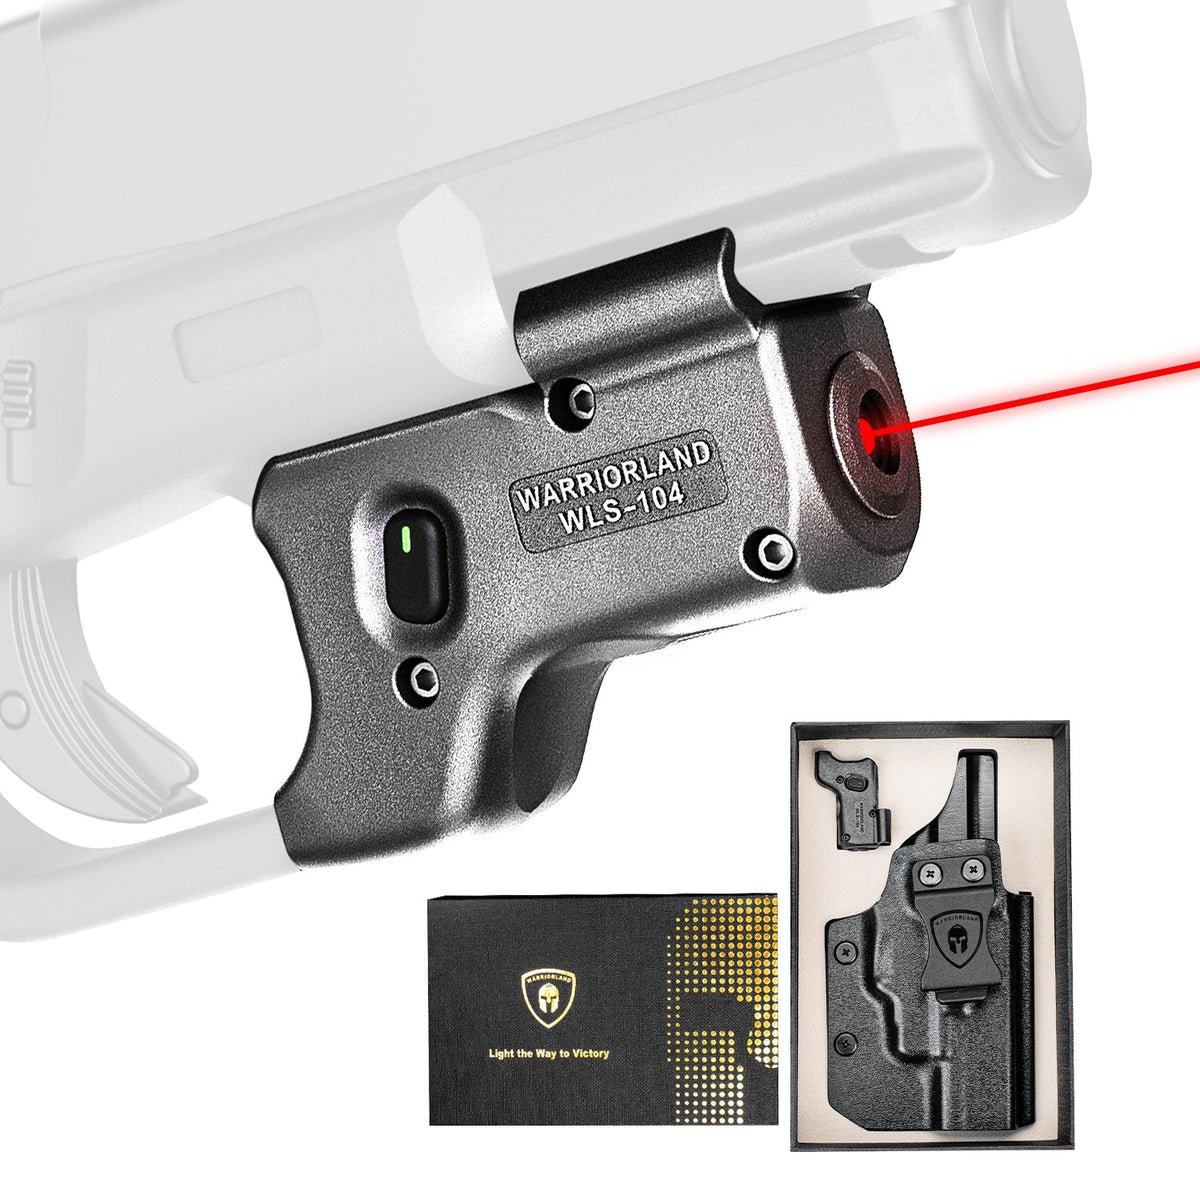 WARRIORLAND WLS-104 Laser Sight Designed to fit Glock 17/19/19X/23/31/32/44/45, Red Laser Sight with Power Indicator, Custom-made Kydex Holster Included, Windage and Elevation Adjustment